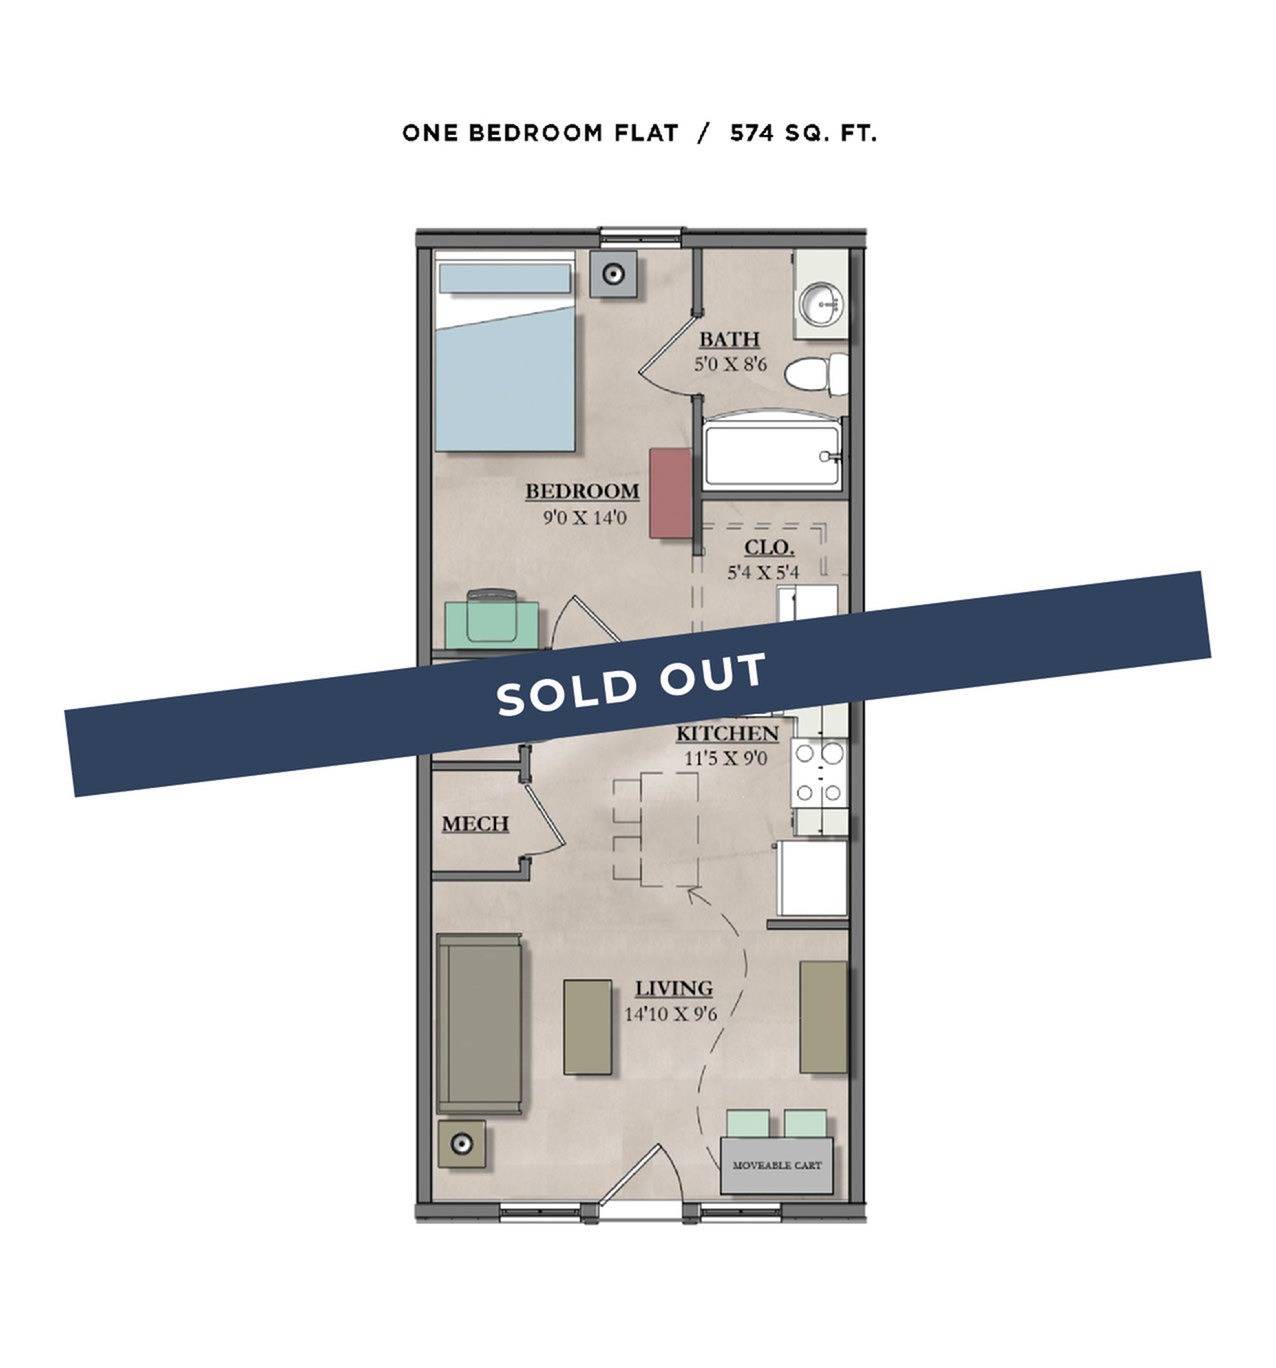 1 bedroom Flat - Sold Out